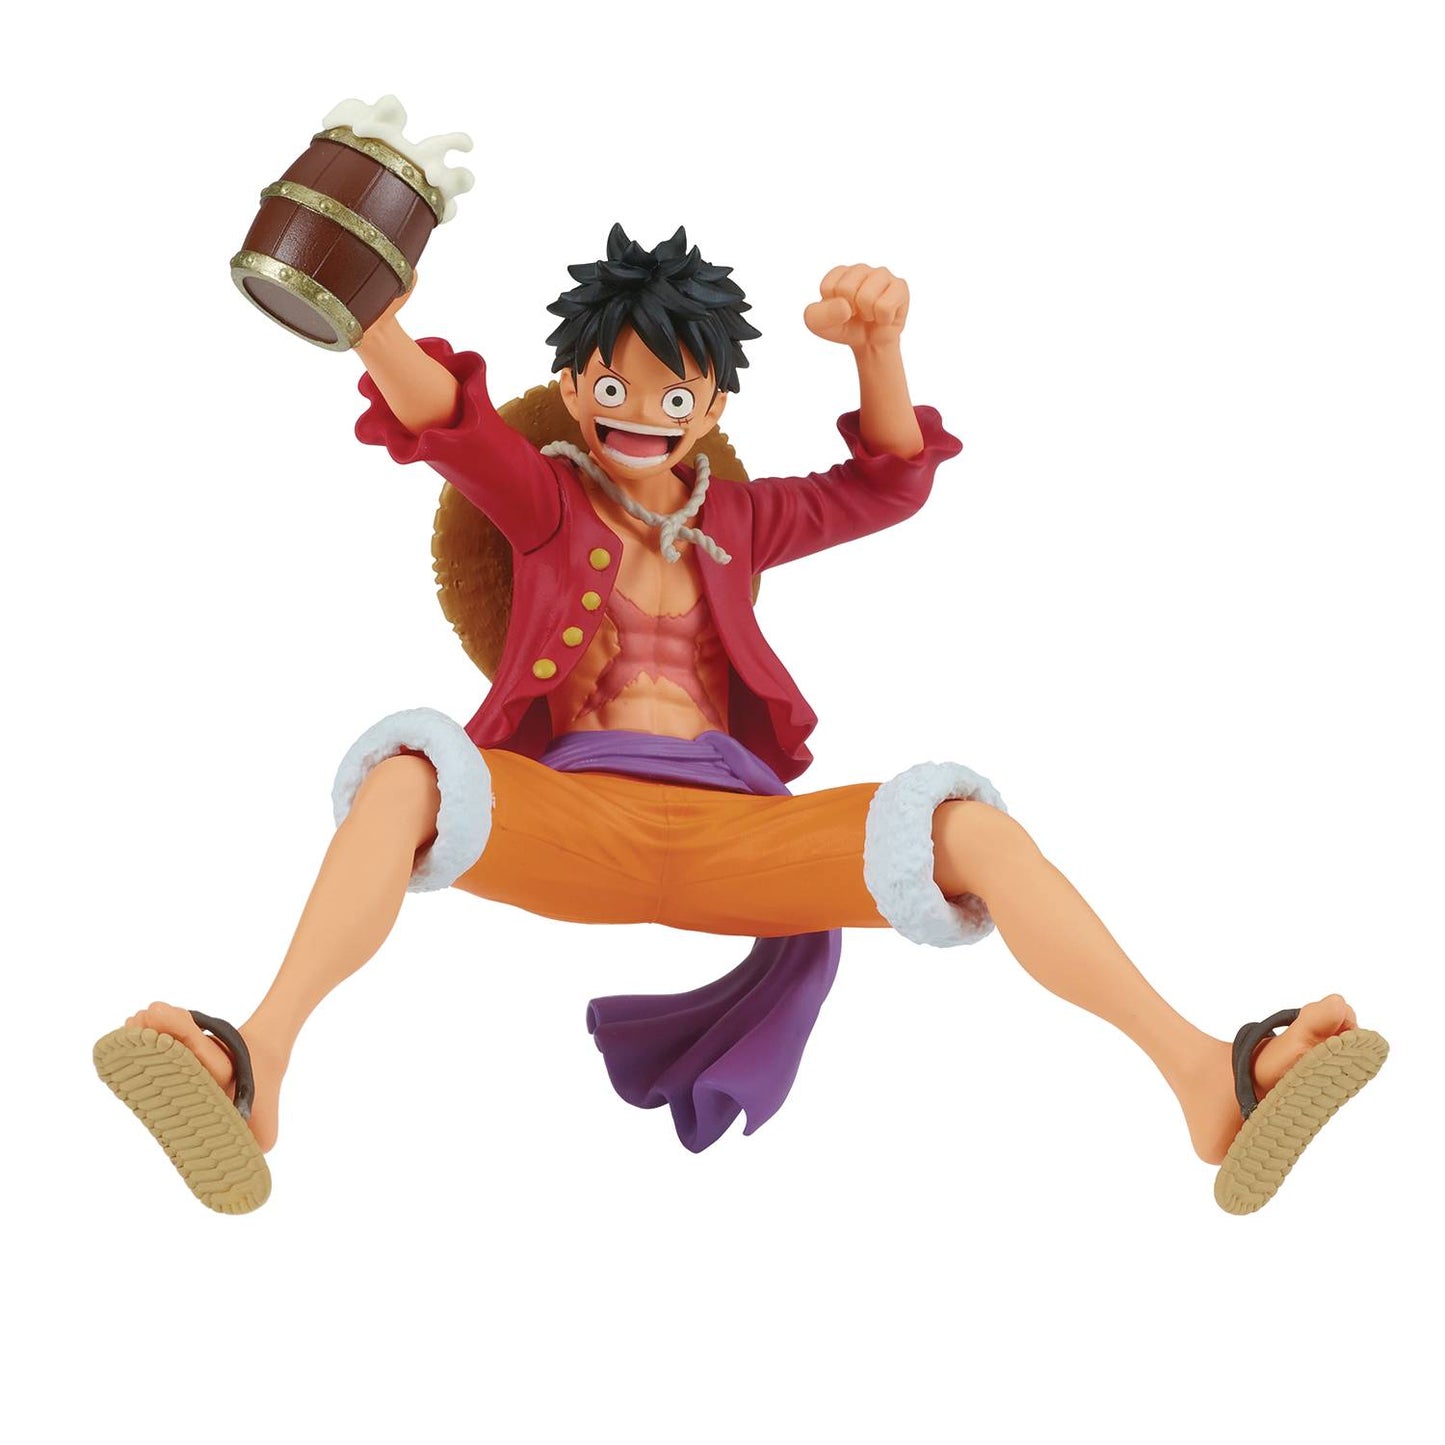 ONE PIECE ITS A BANQUET MONKEY D LUFFY FIG (MAY228737) (C: 1